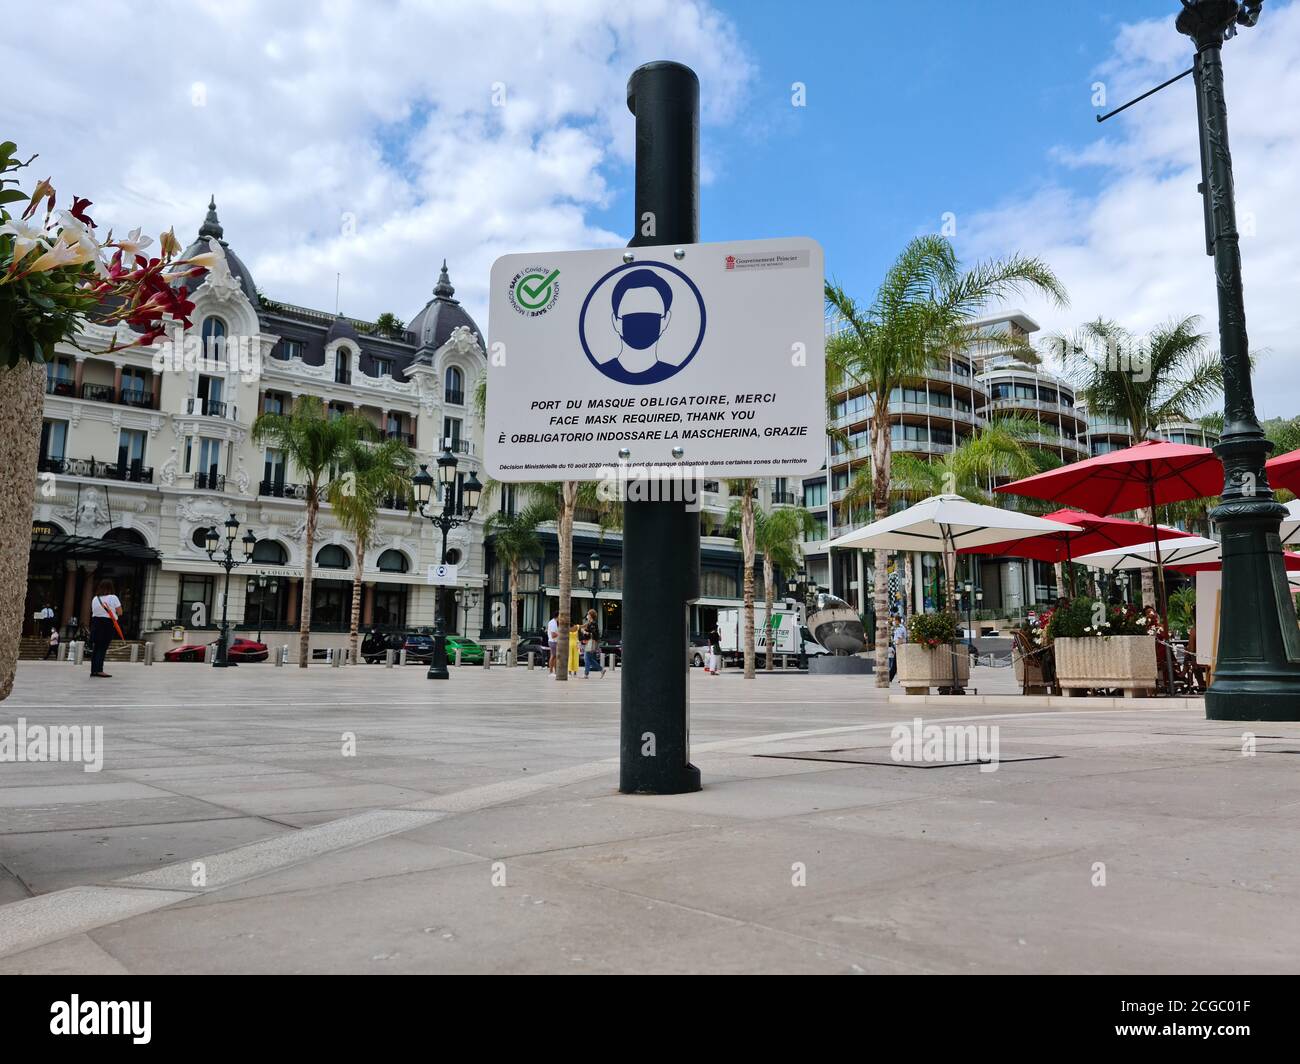 Monte-Carlo, Monaco - September 9, 2020: Protective Face Mask Required Sign On The Casino Square In Monte-Carlo, Monaco, Europe. Close Up View Stock Photo